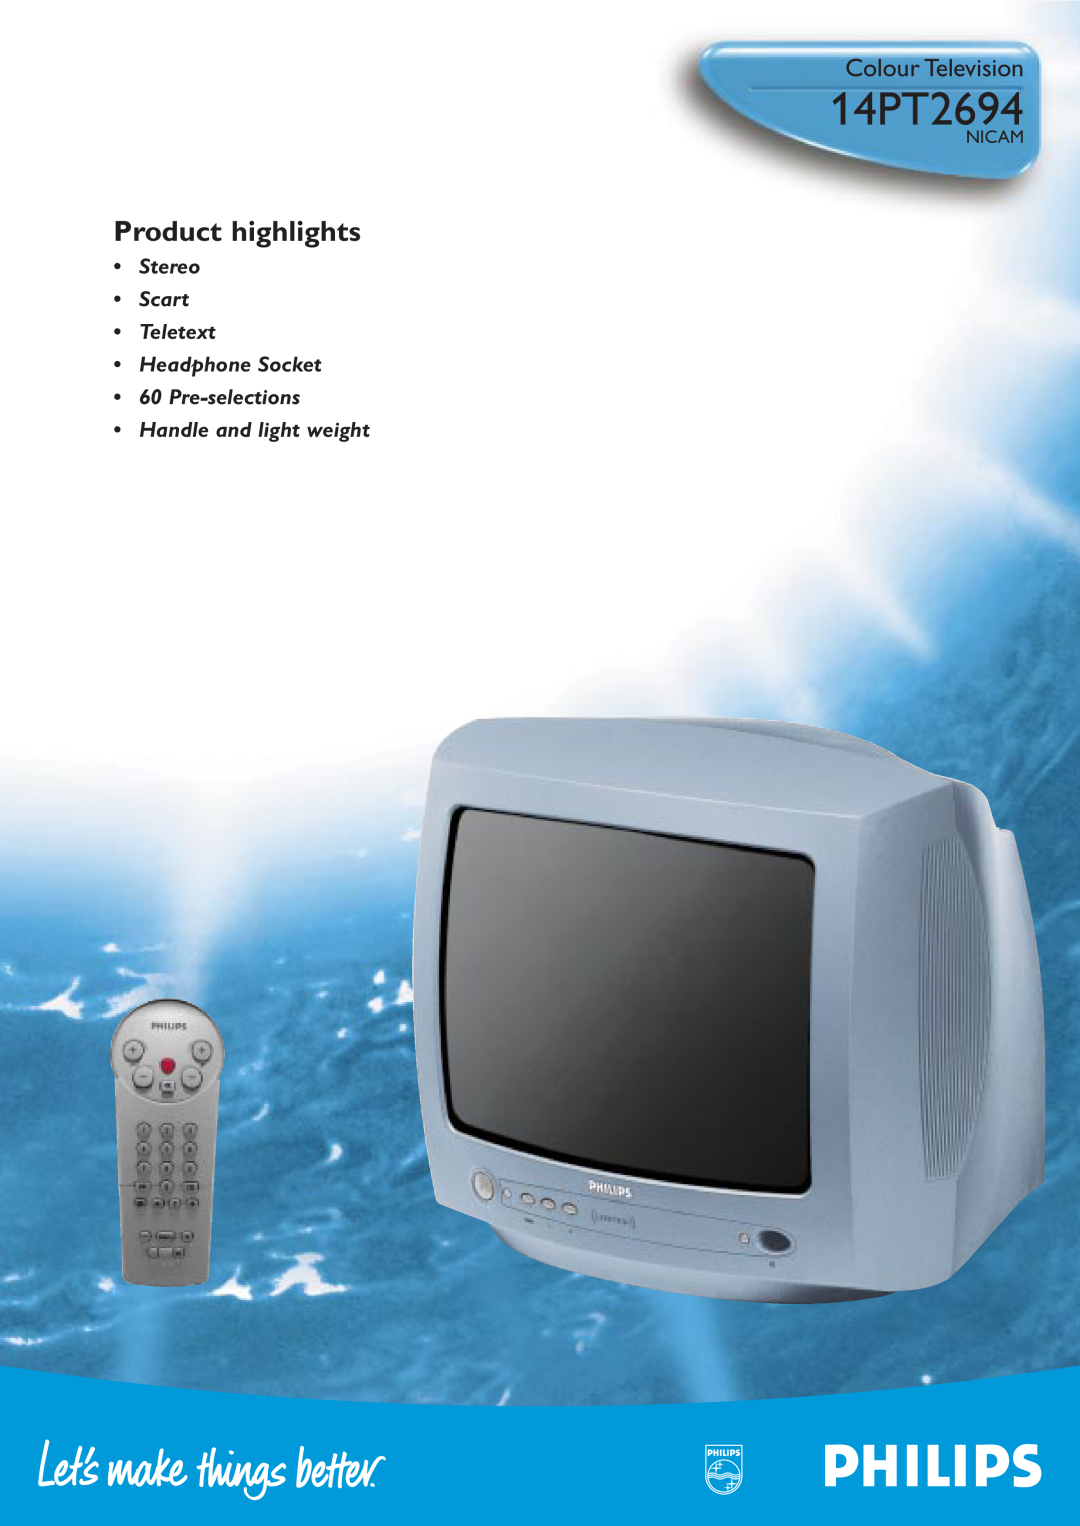 Philips 14PT2694 manual Colour Television, Nicam, Product highlights, Handle and light weight 